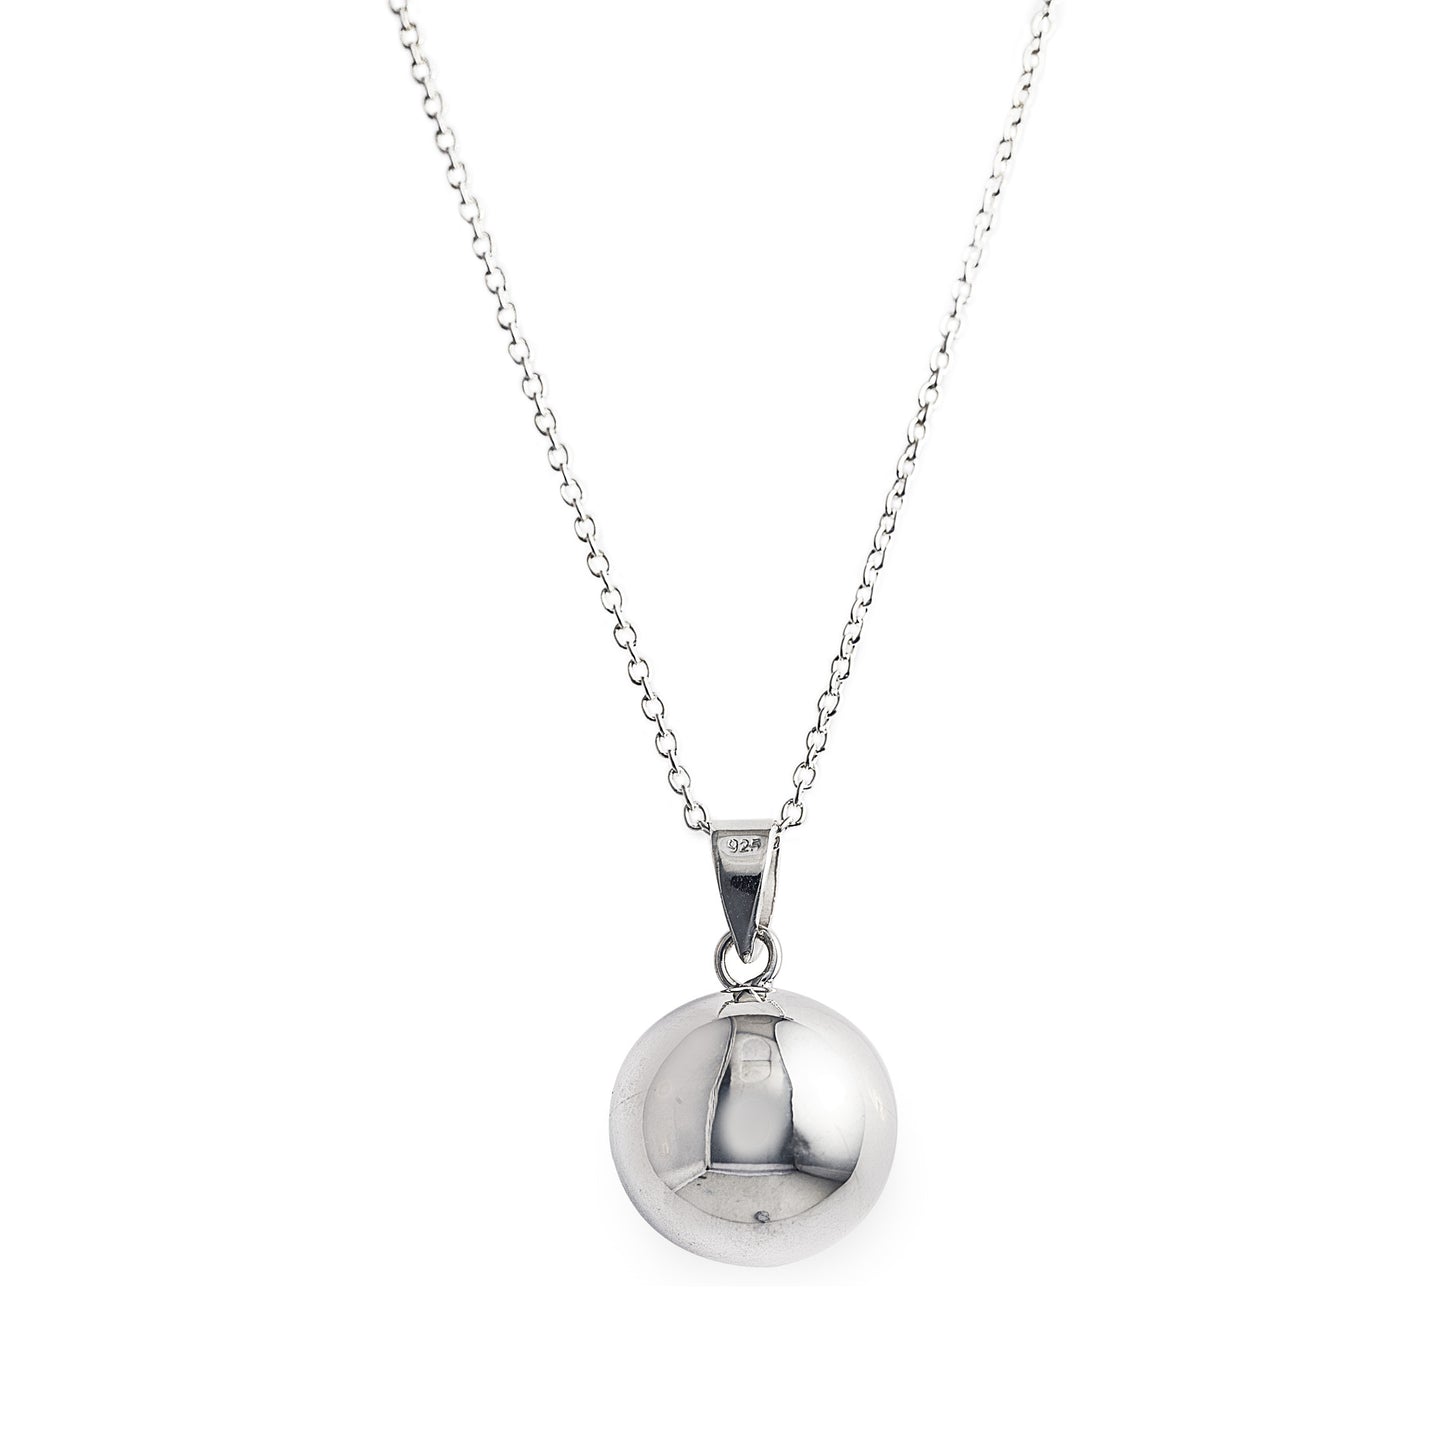 Large Villa Necklace Ball Pendant in 925 sterling silver with a fine silver chain. Worldwide shipping. Jewellery by Bellagio & Co.